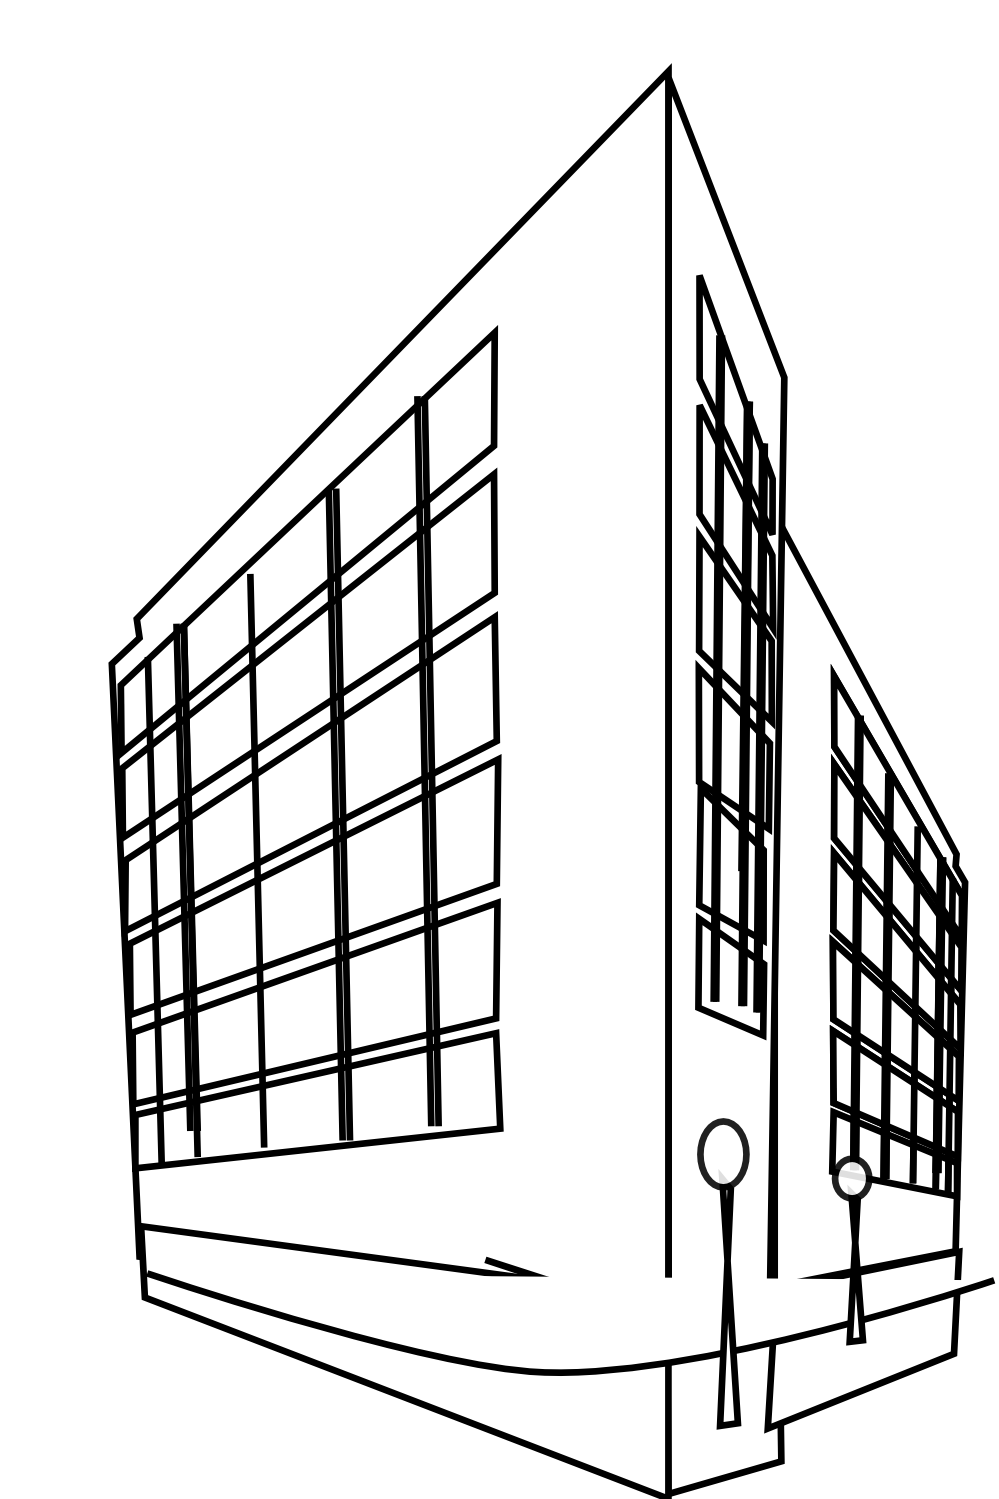 Building clip art black and white free clipart